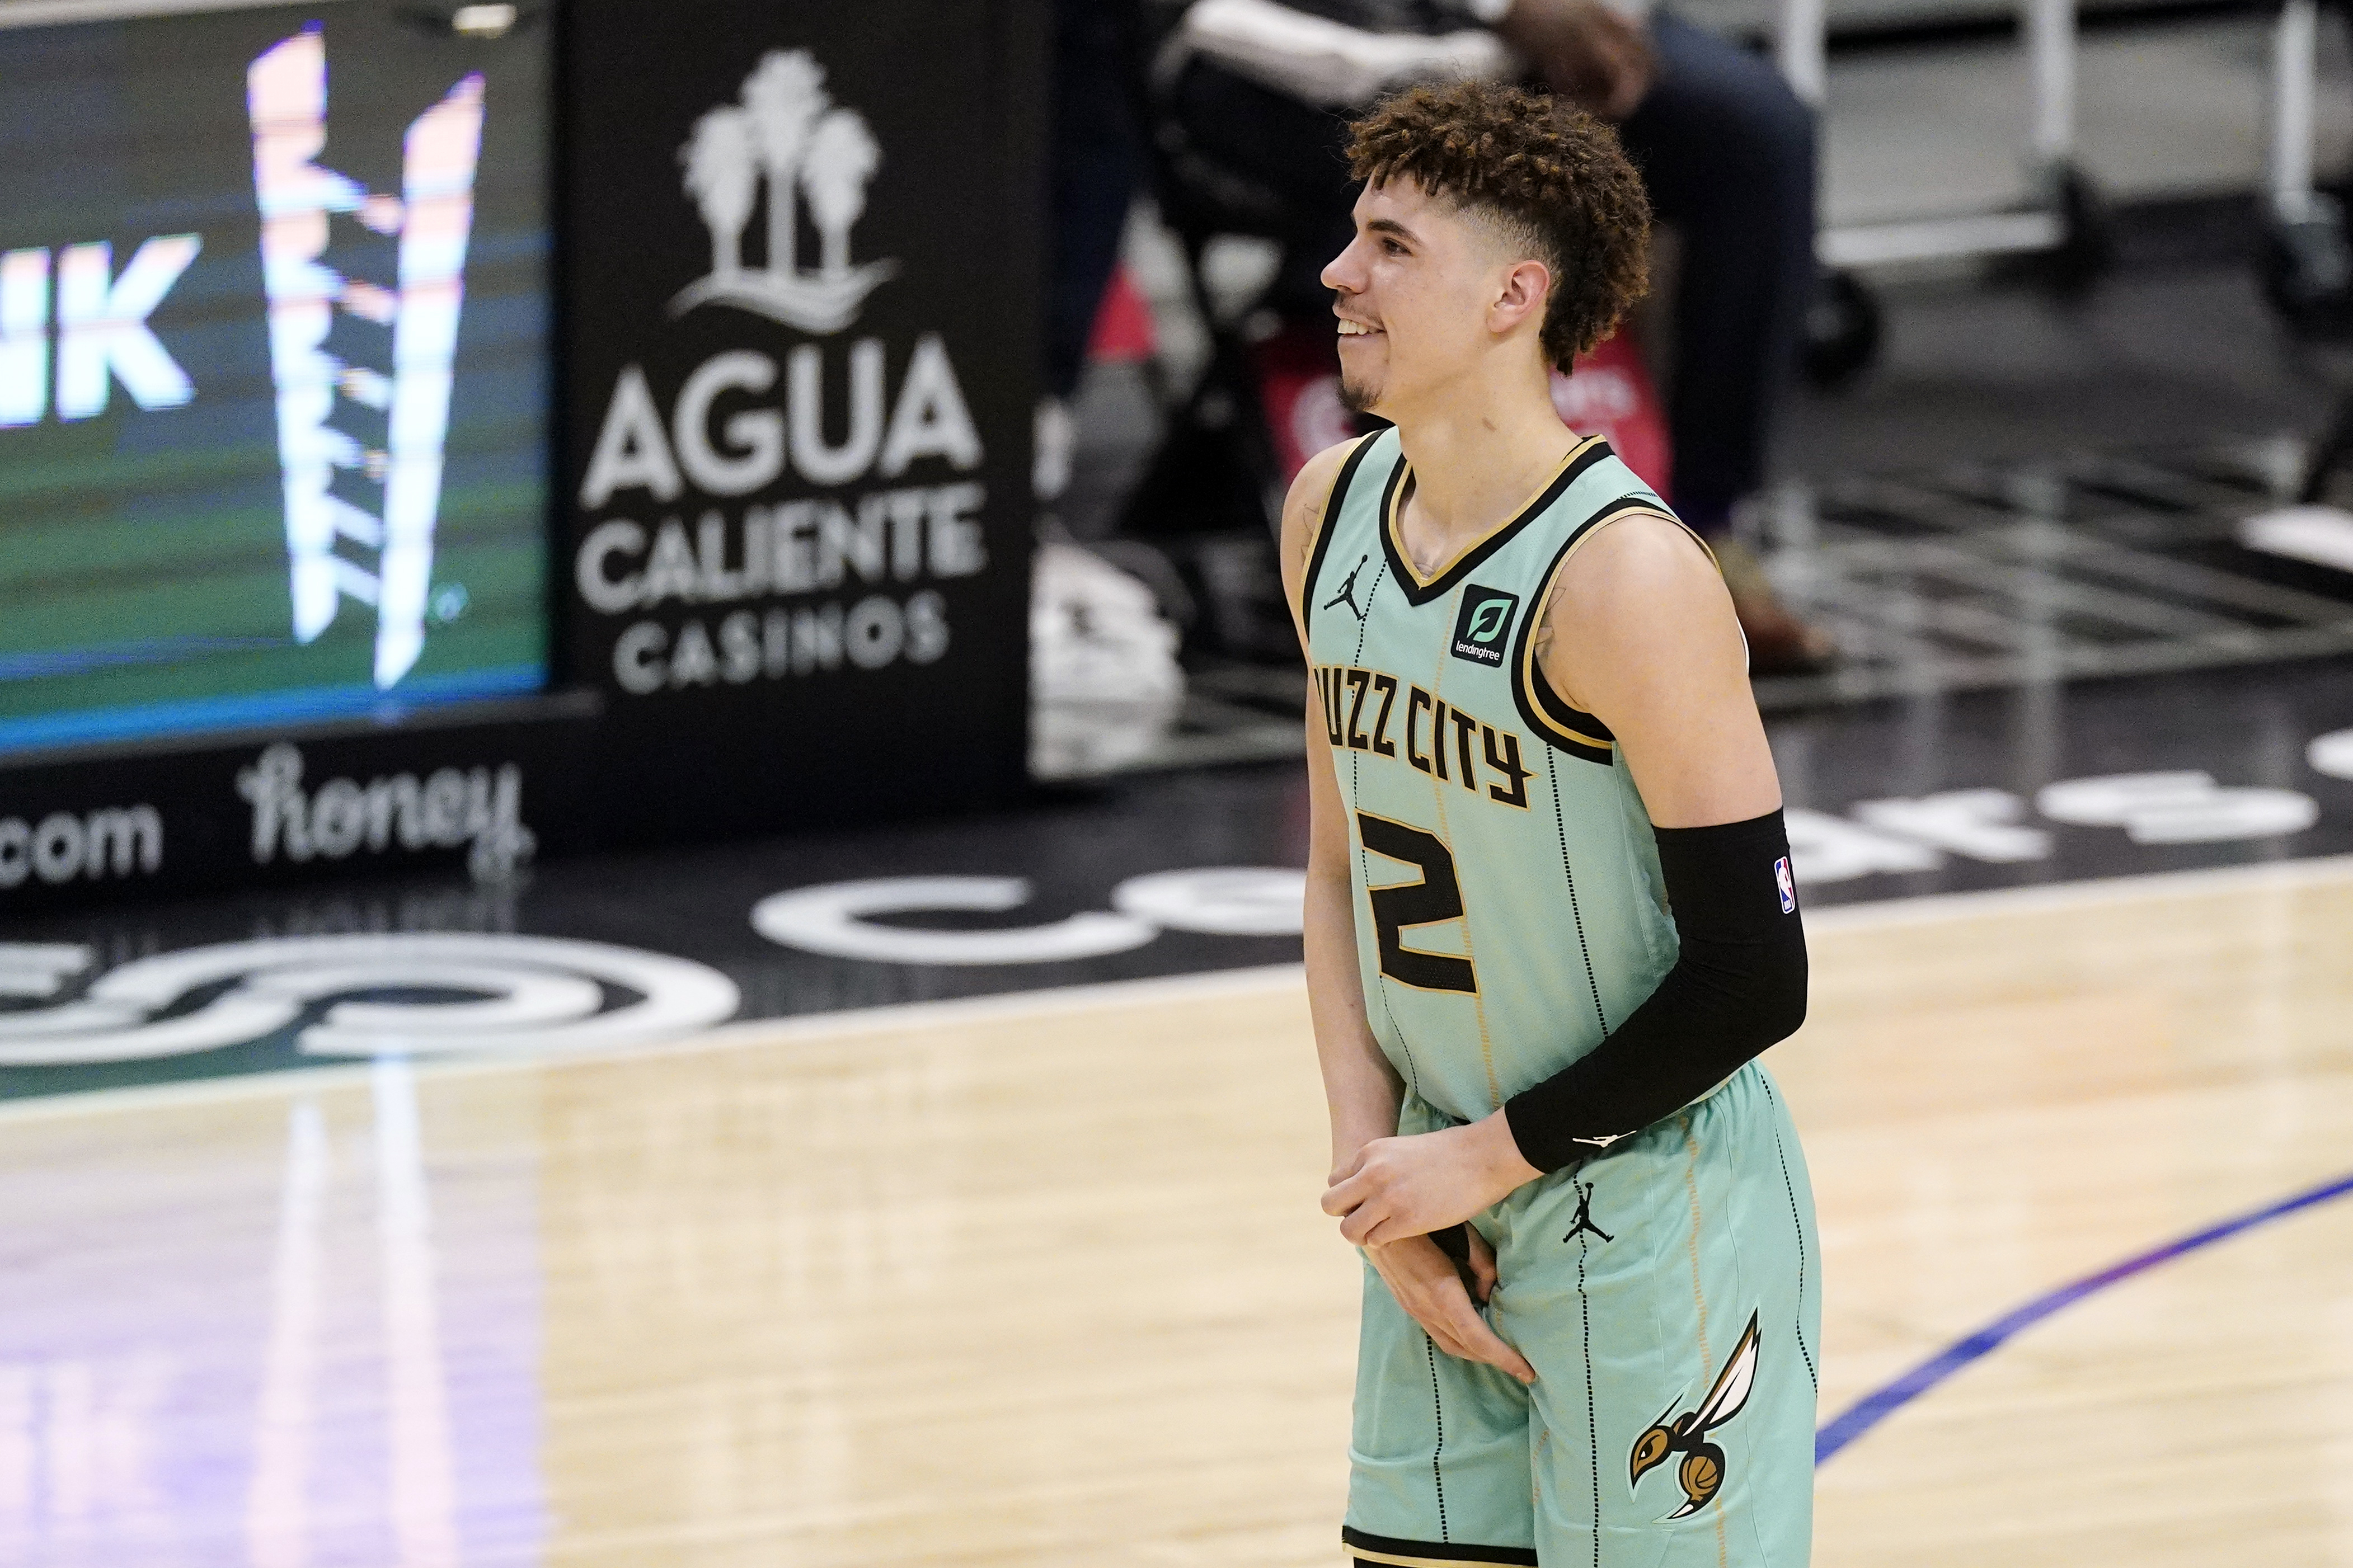 Report: Hornets' LaMelo Ball voted NBA rookie of the year